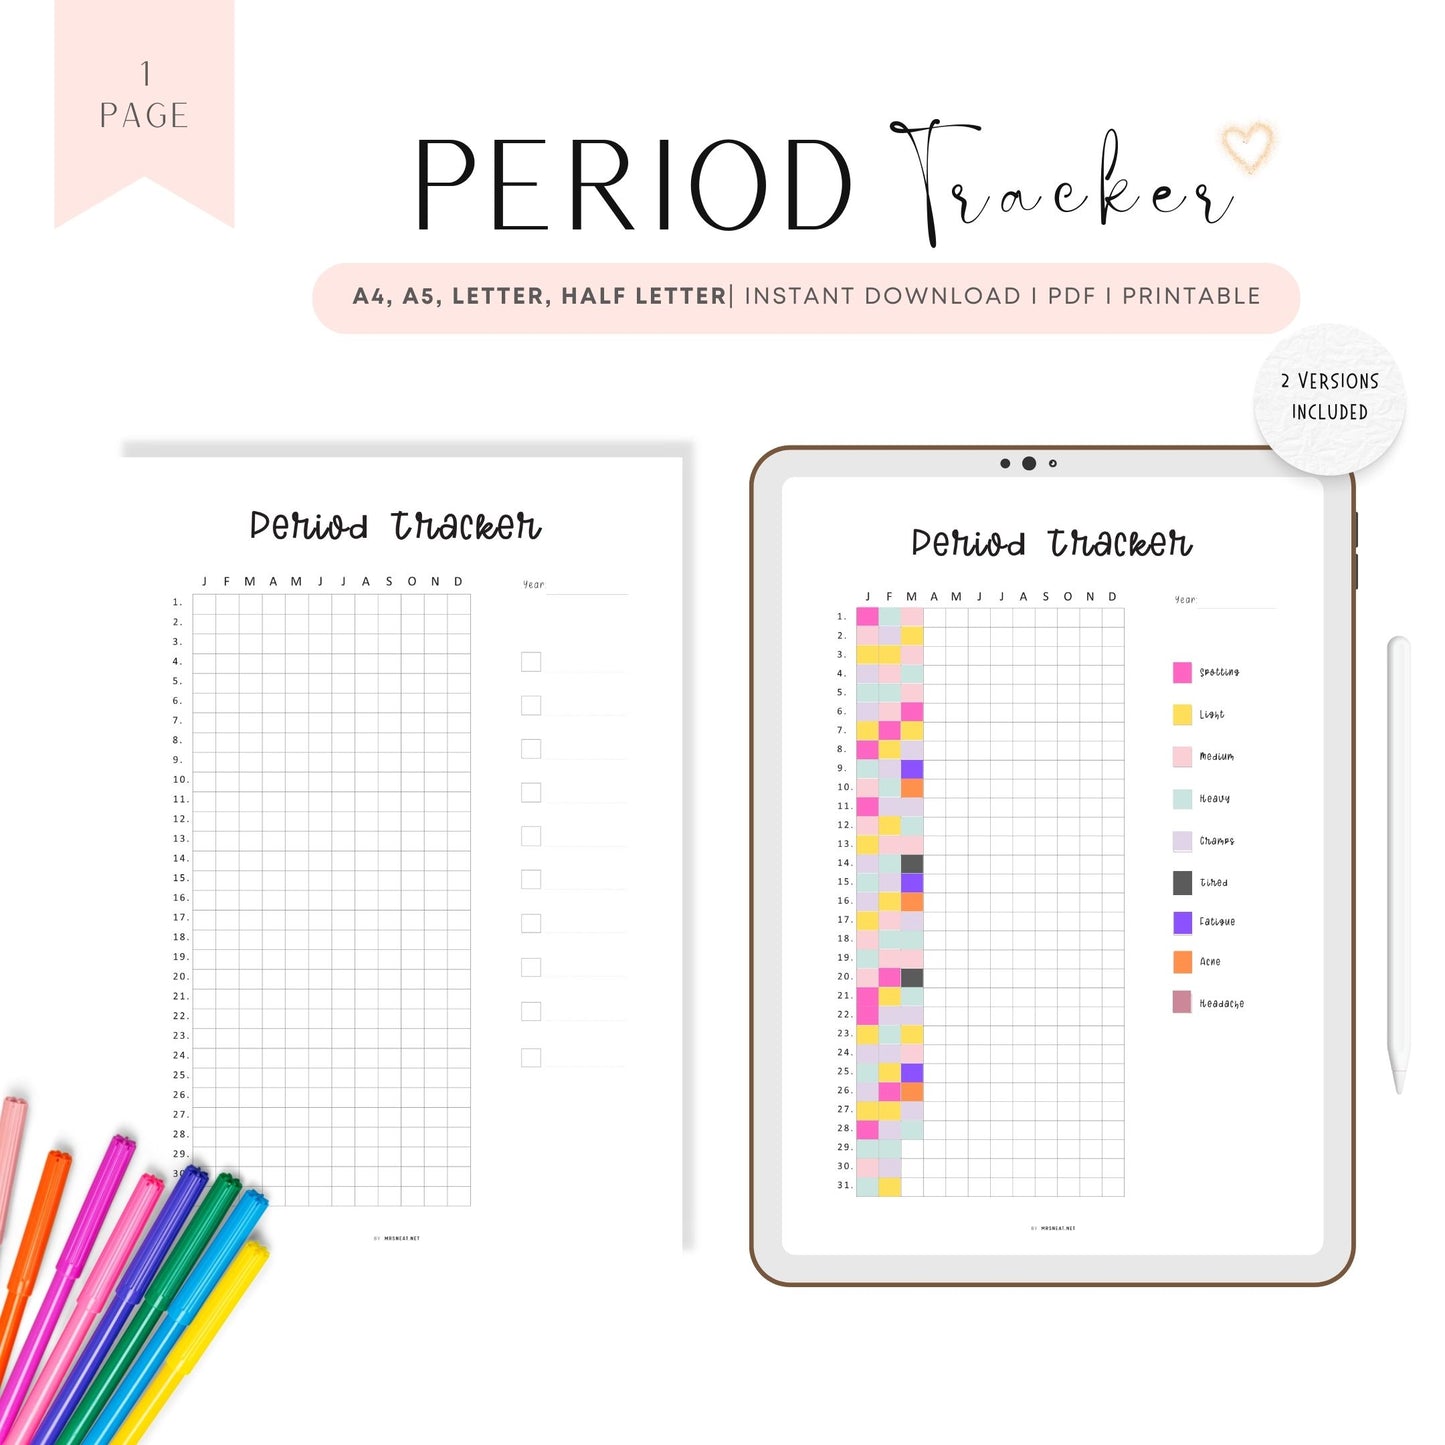 One Year Period Tracker Template